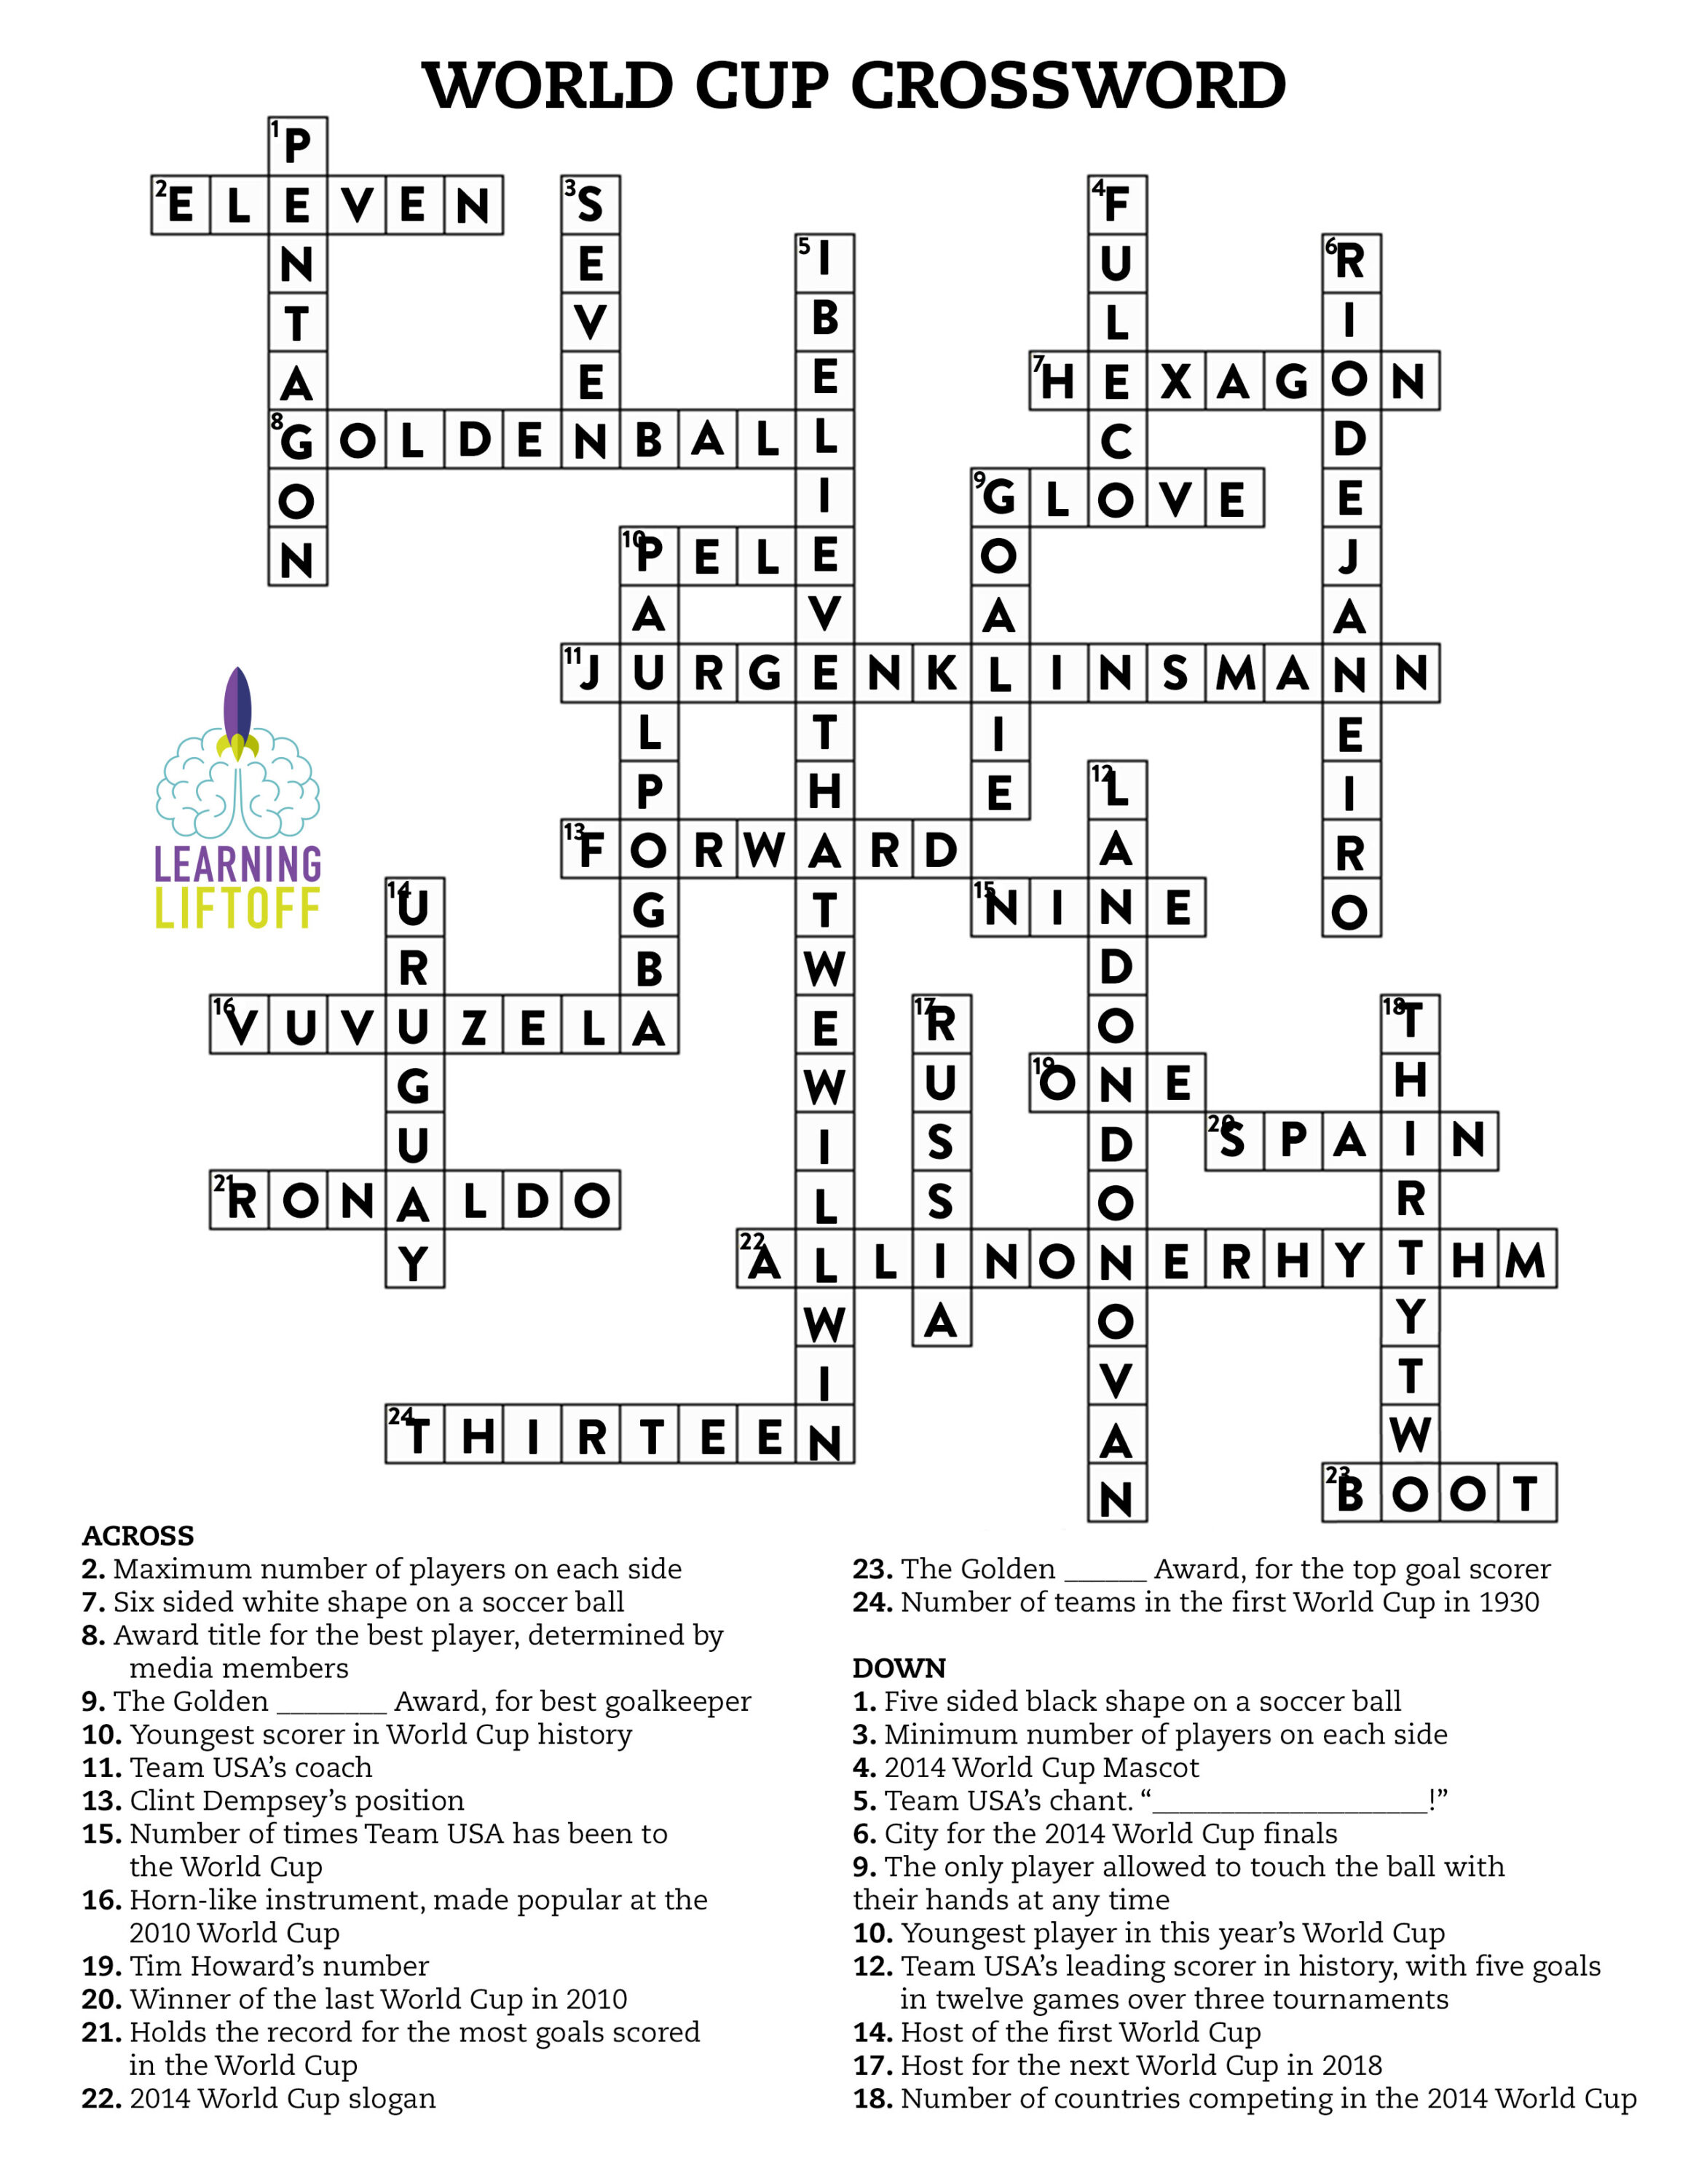 WorldCup_Crossword_Answers  Learning Liftoff